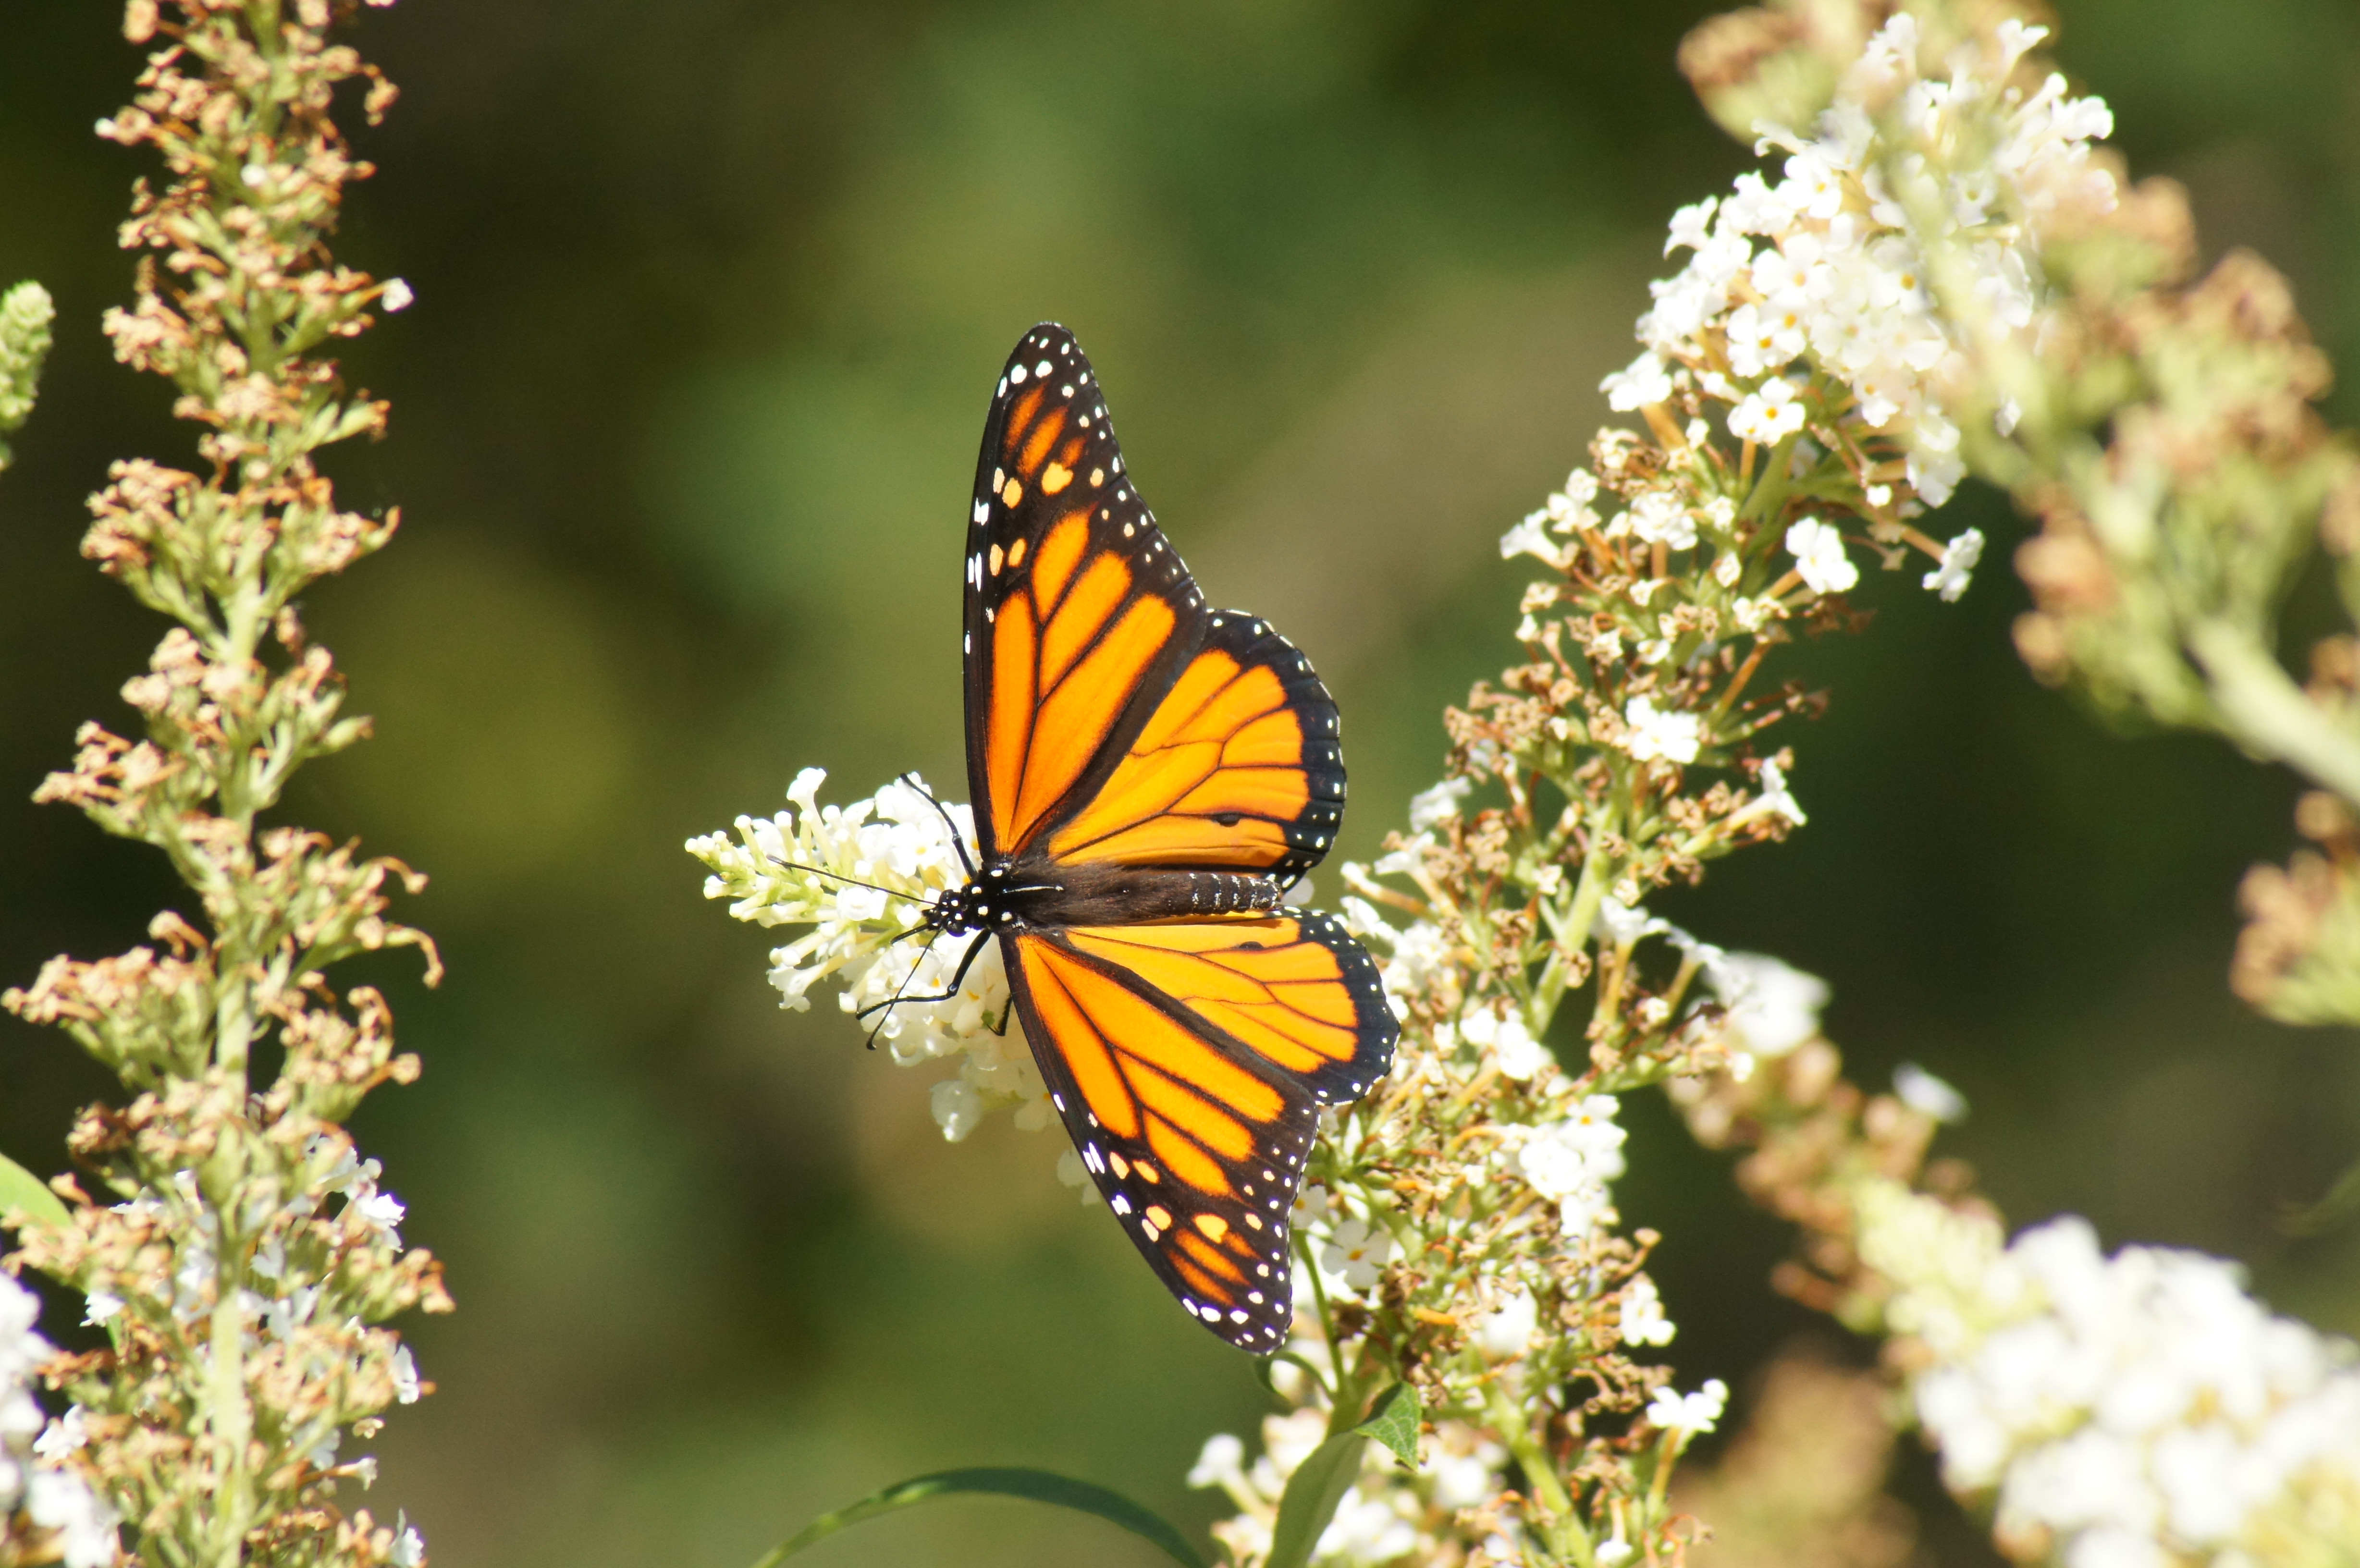 Ultrawide Wallpapers Macro handsomely, butterfly, animals, pattern